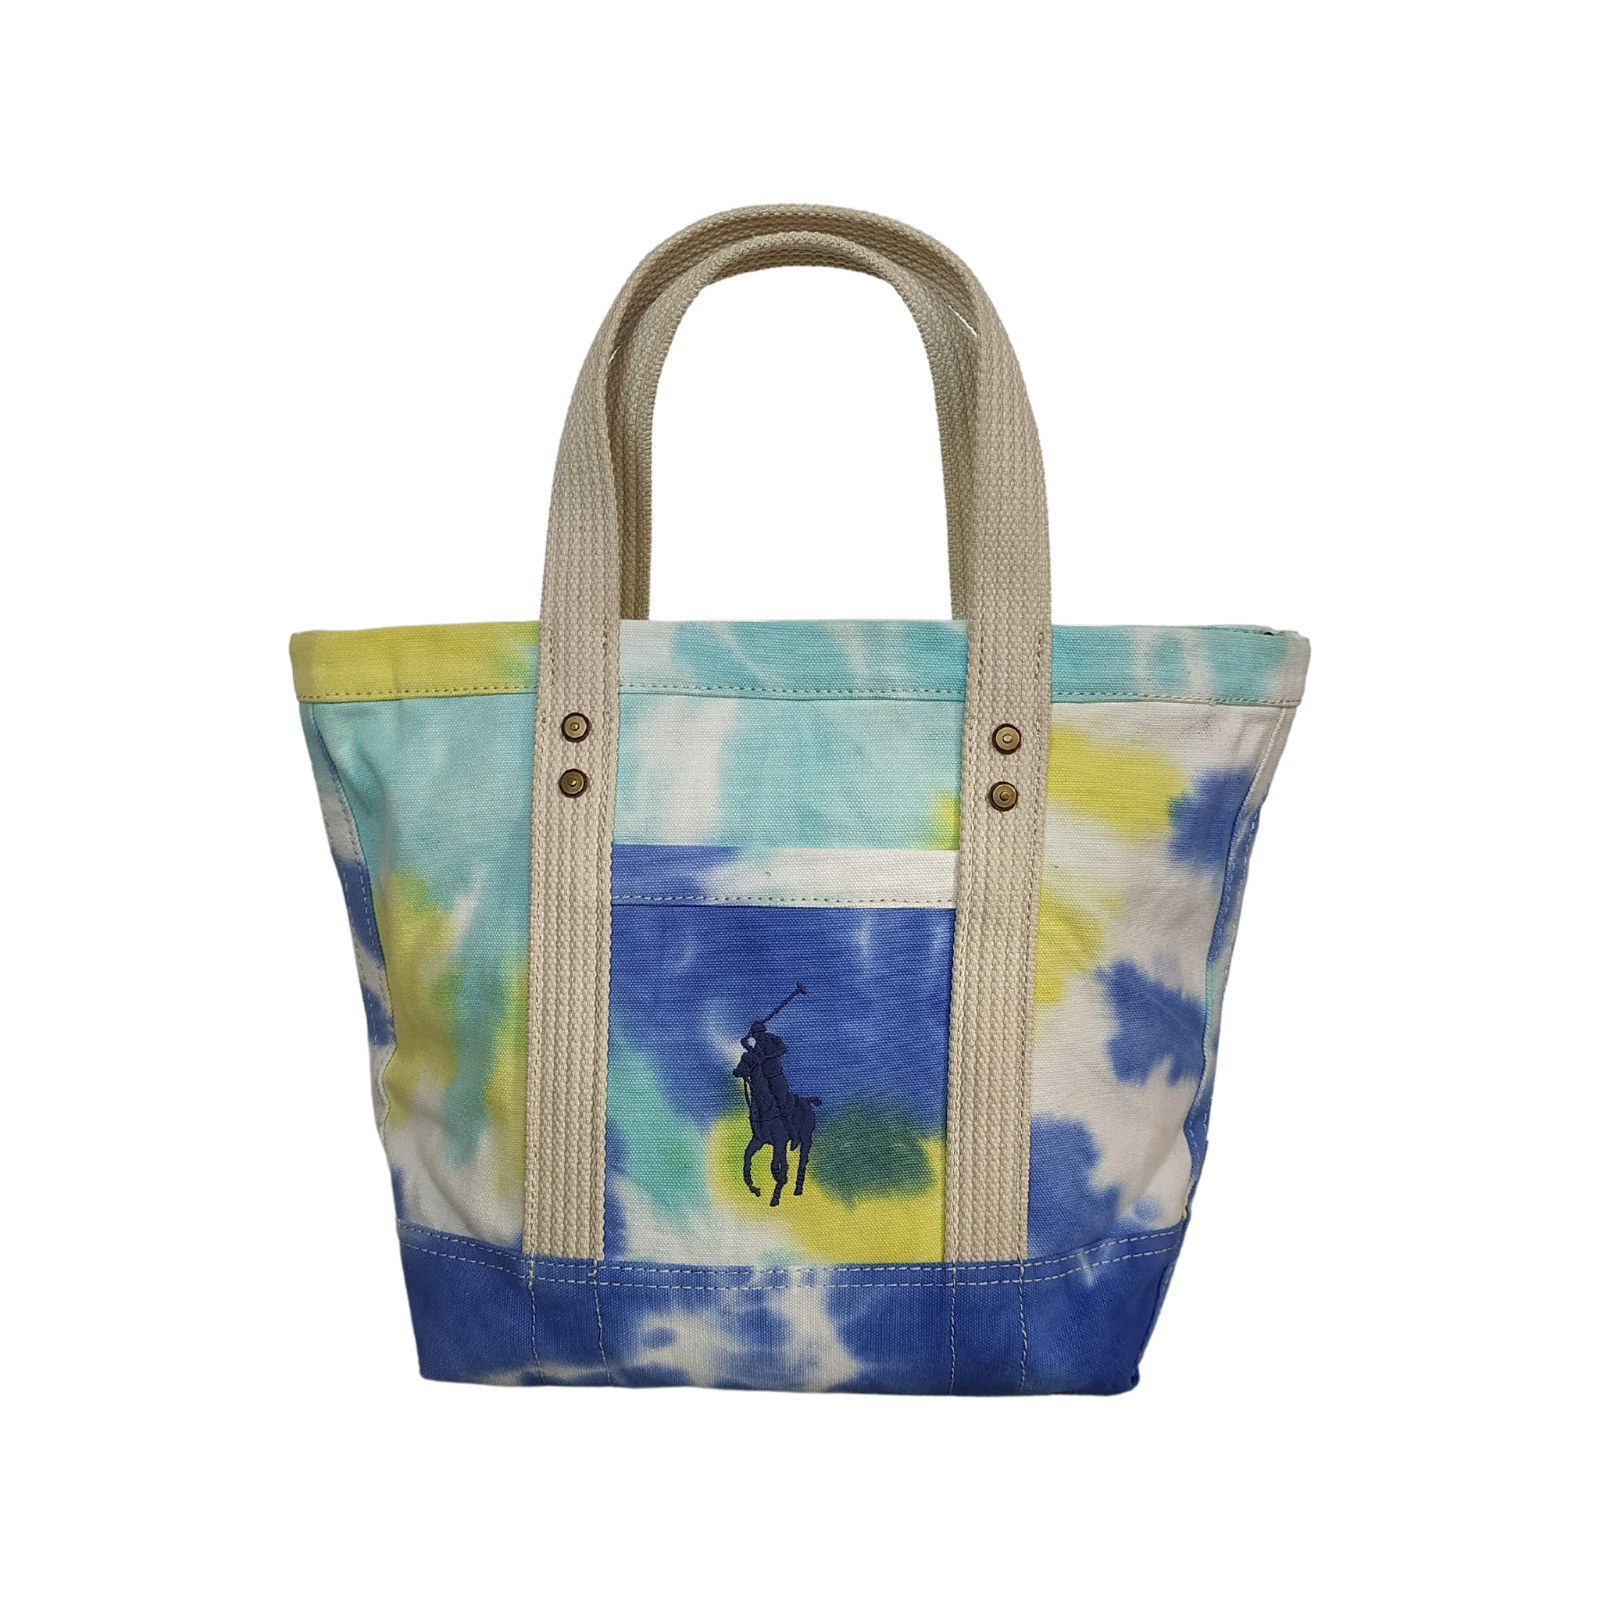 Primary image for Polo Ralph Lauren Canvas Tie-Dye Small Tote Bag $249 WORLDWIDE SHIPPING